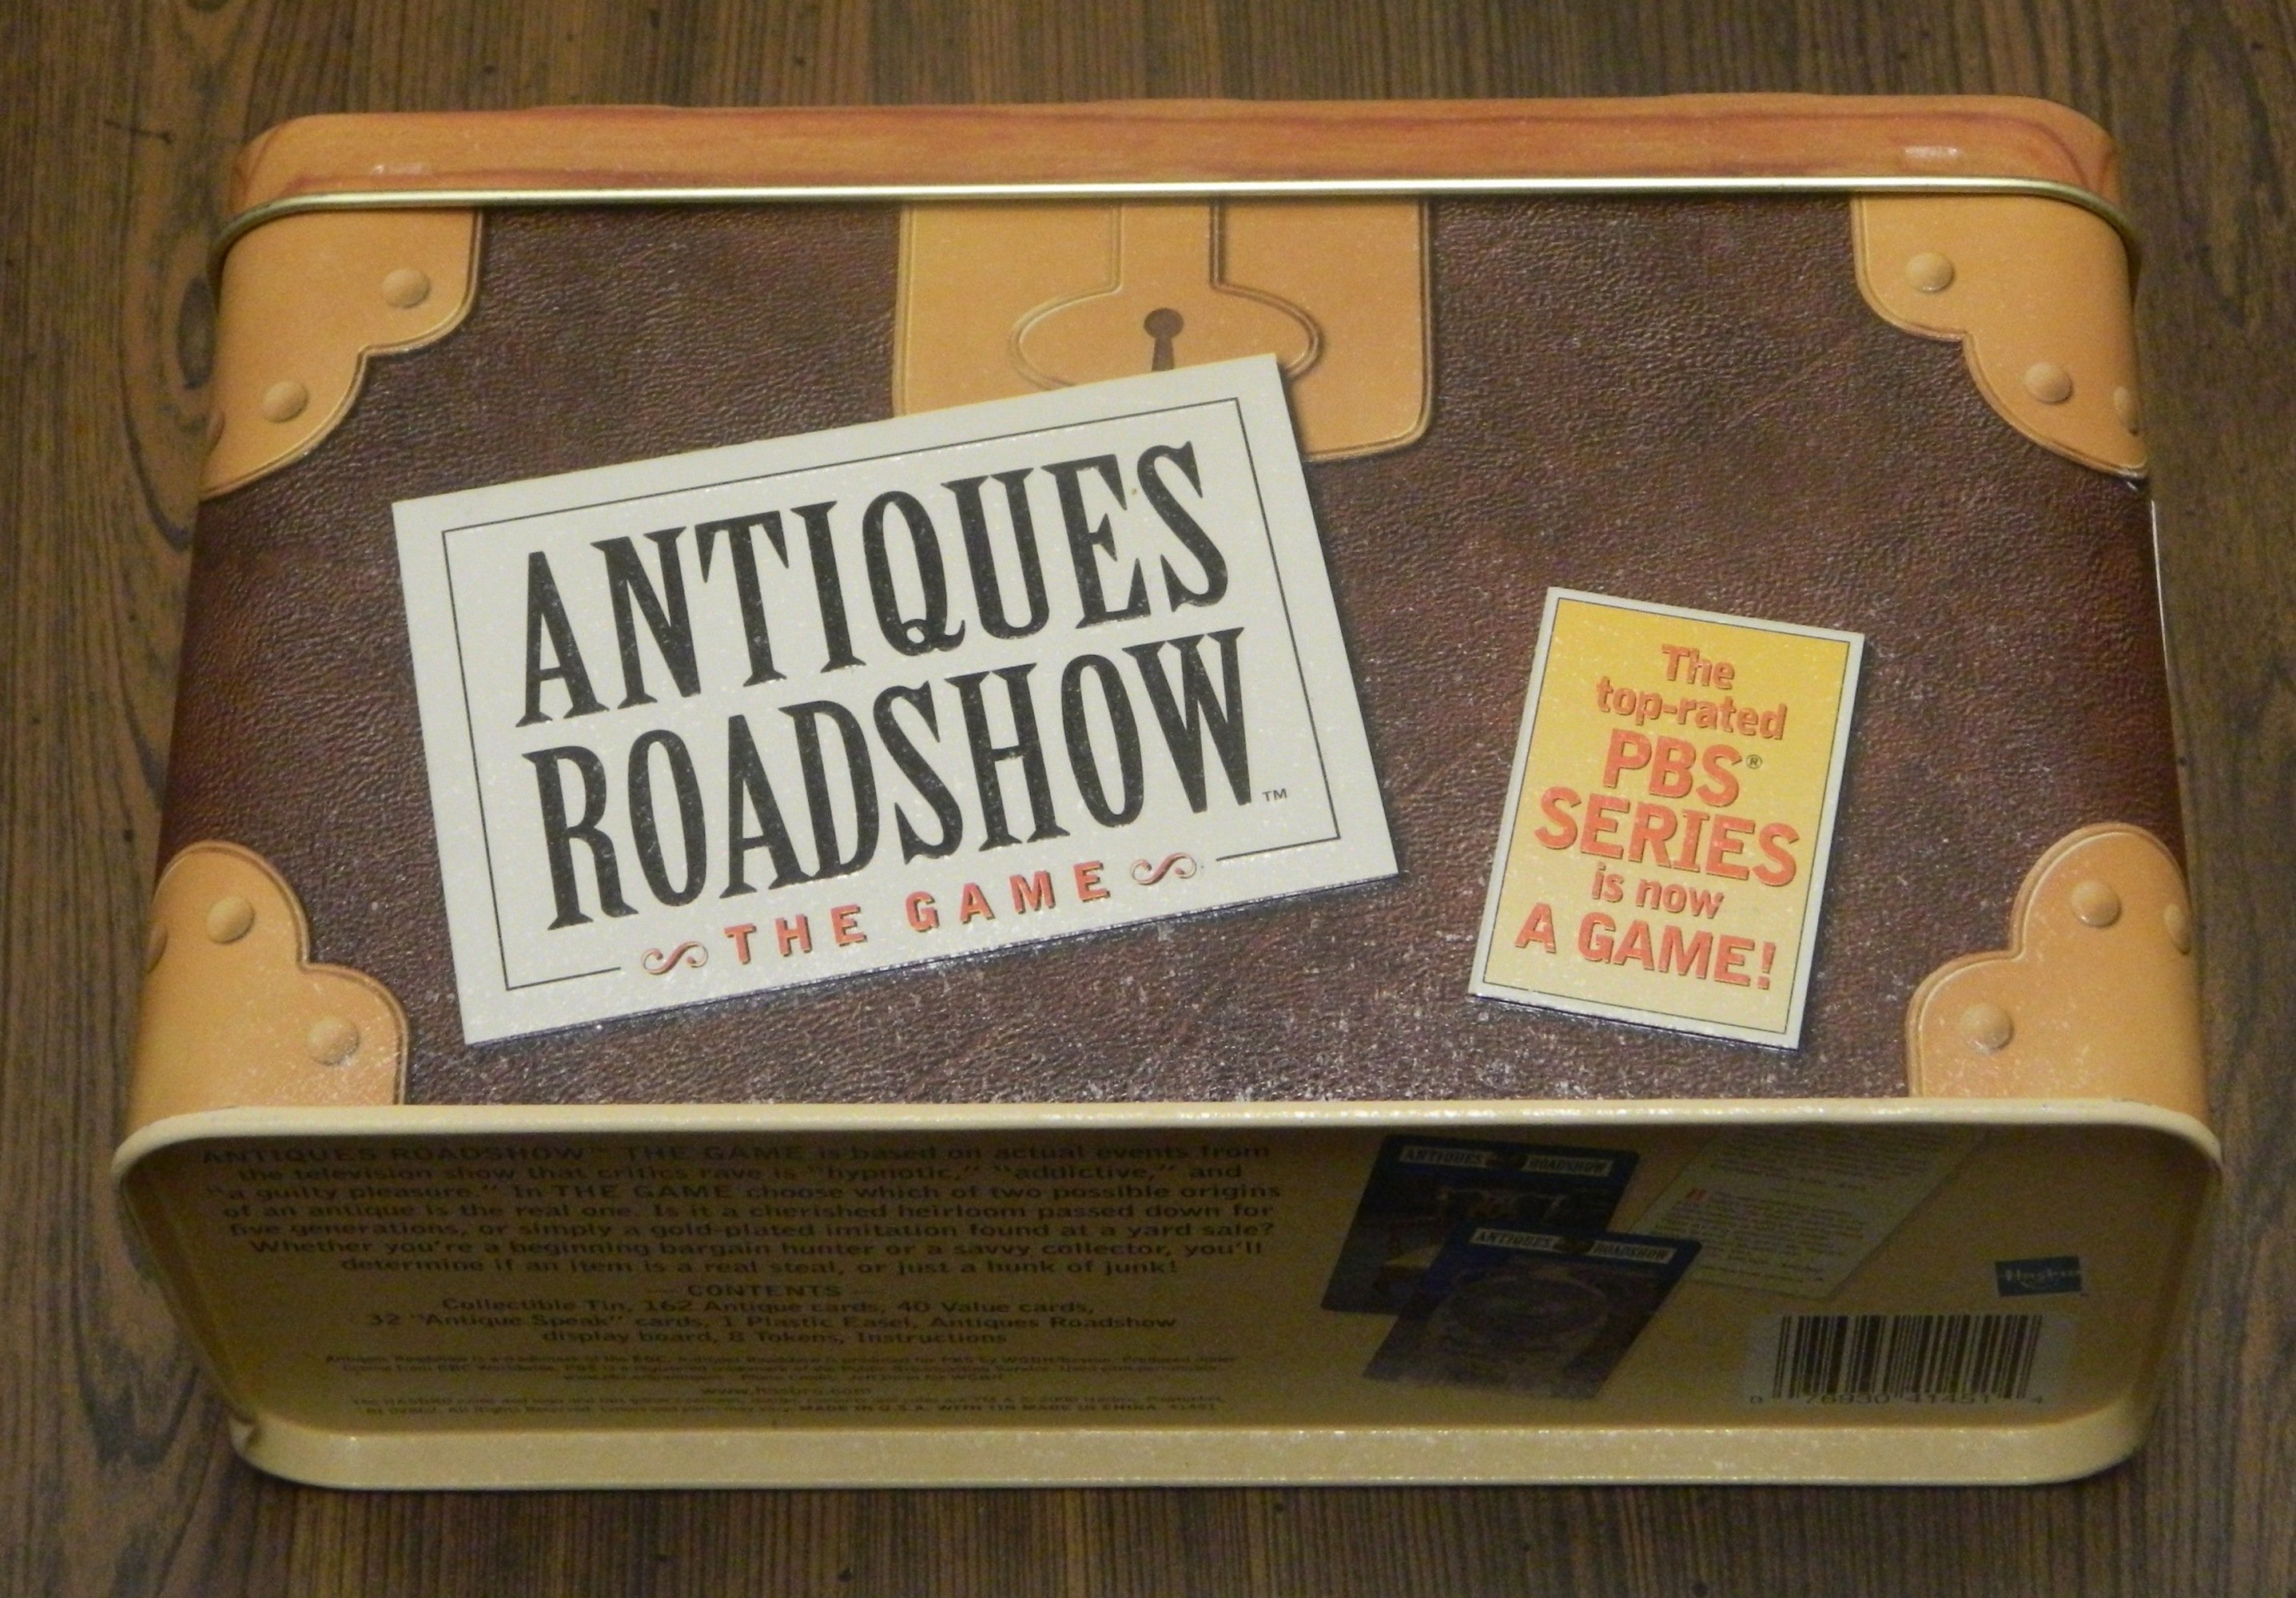 Antiques Roadshow The Game a Collectible Treasure Hunt Hasbro 2000 for sale online 